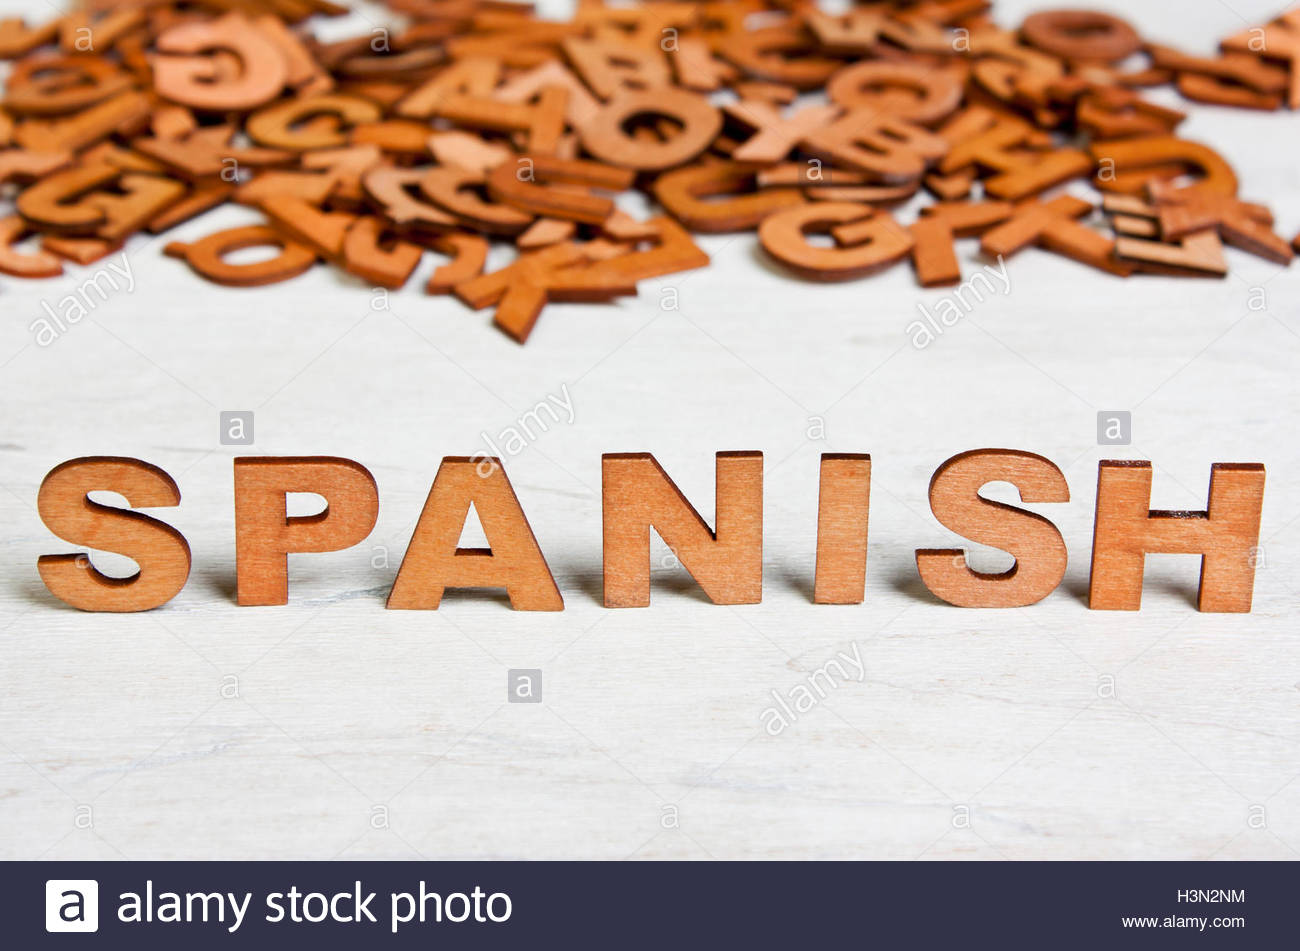 Word Spanish Made With Wooden Letters On A Background Of Other